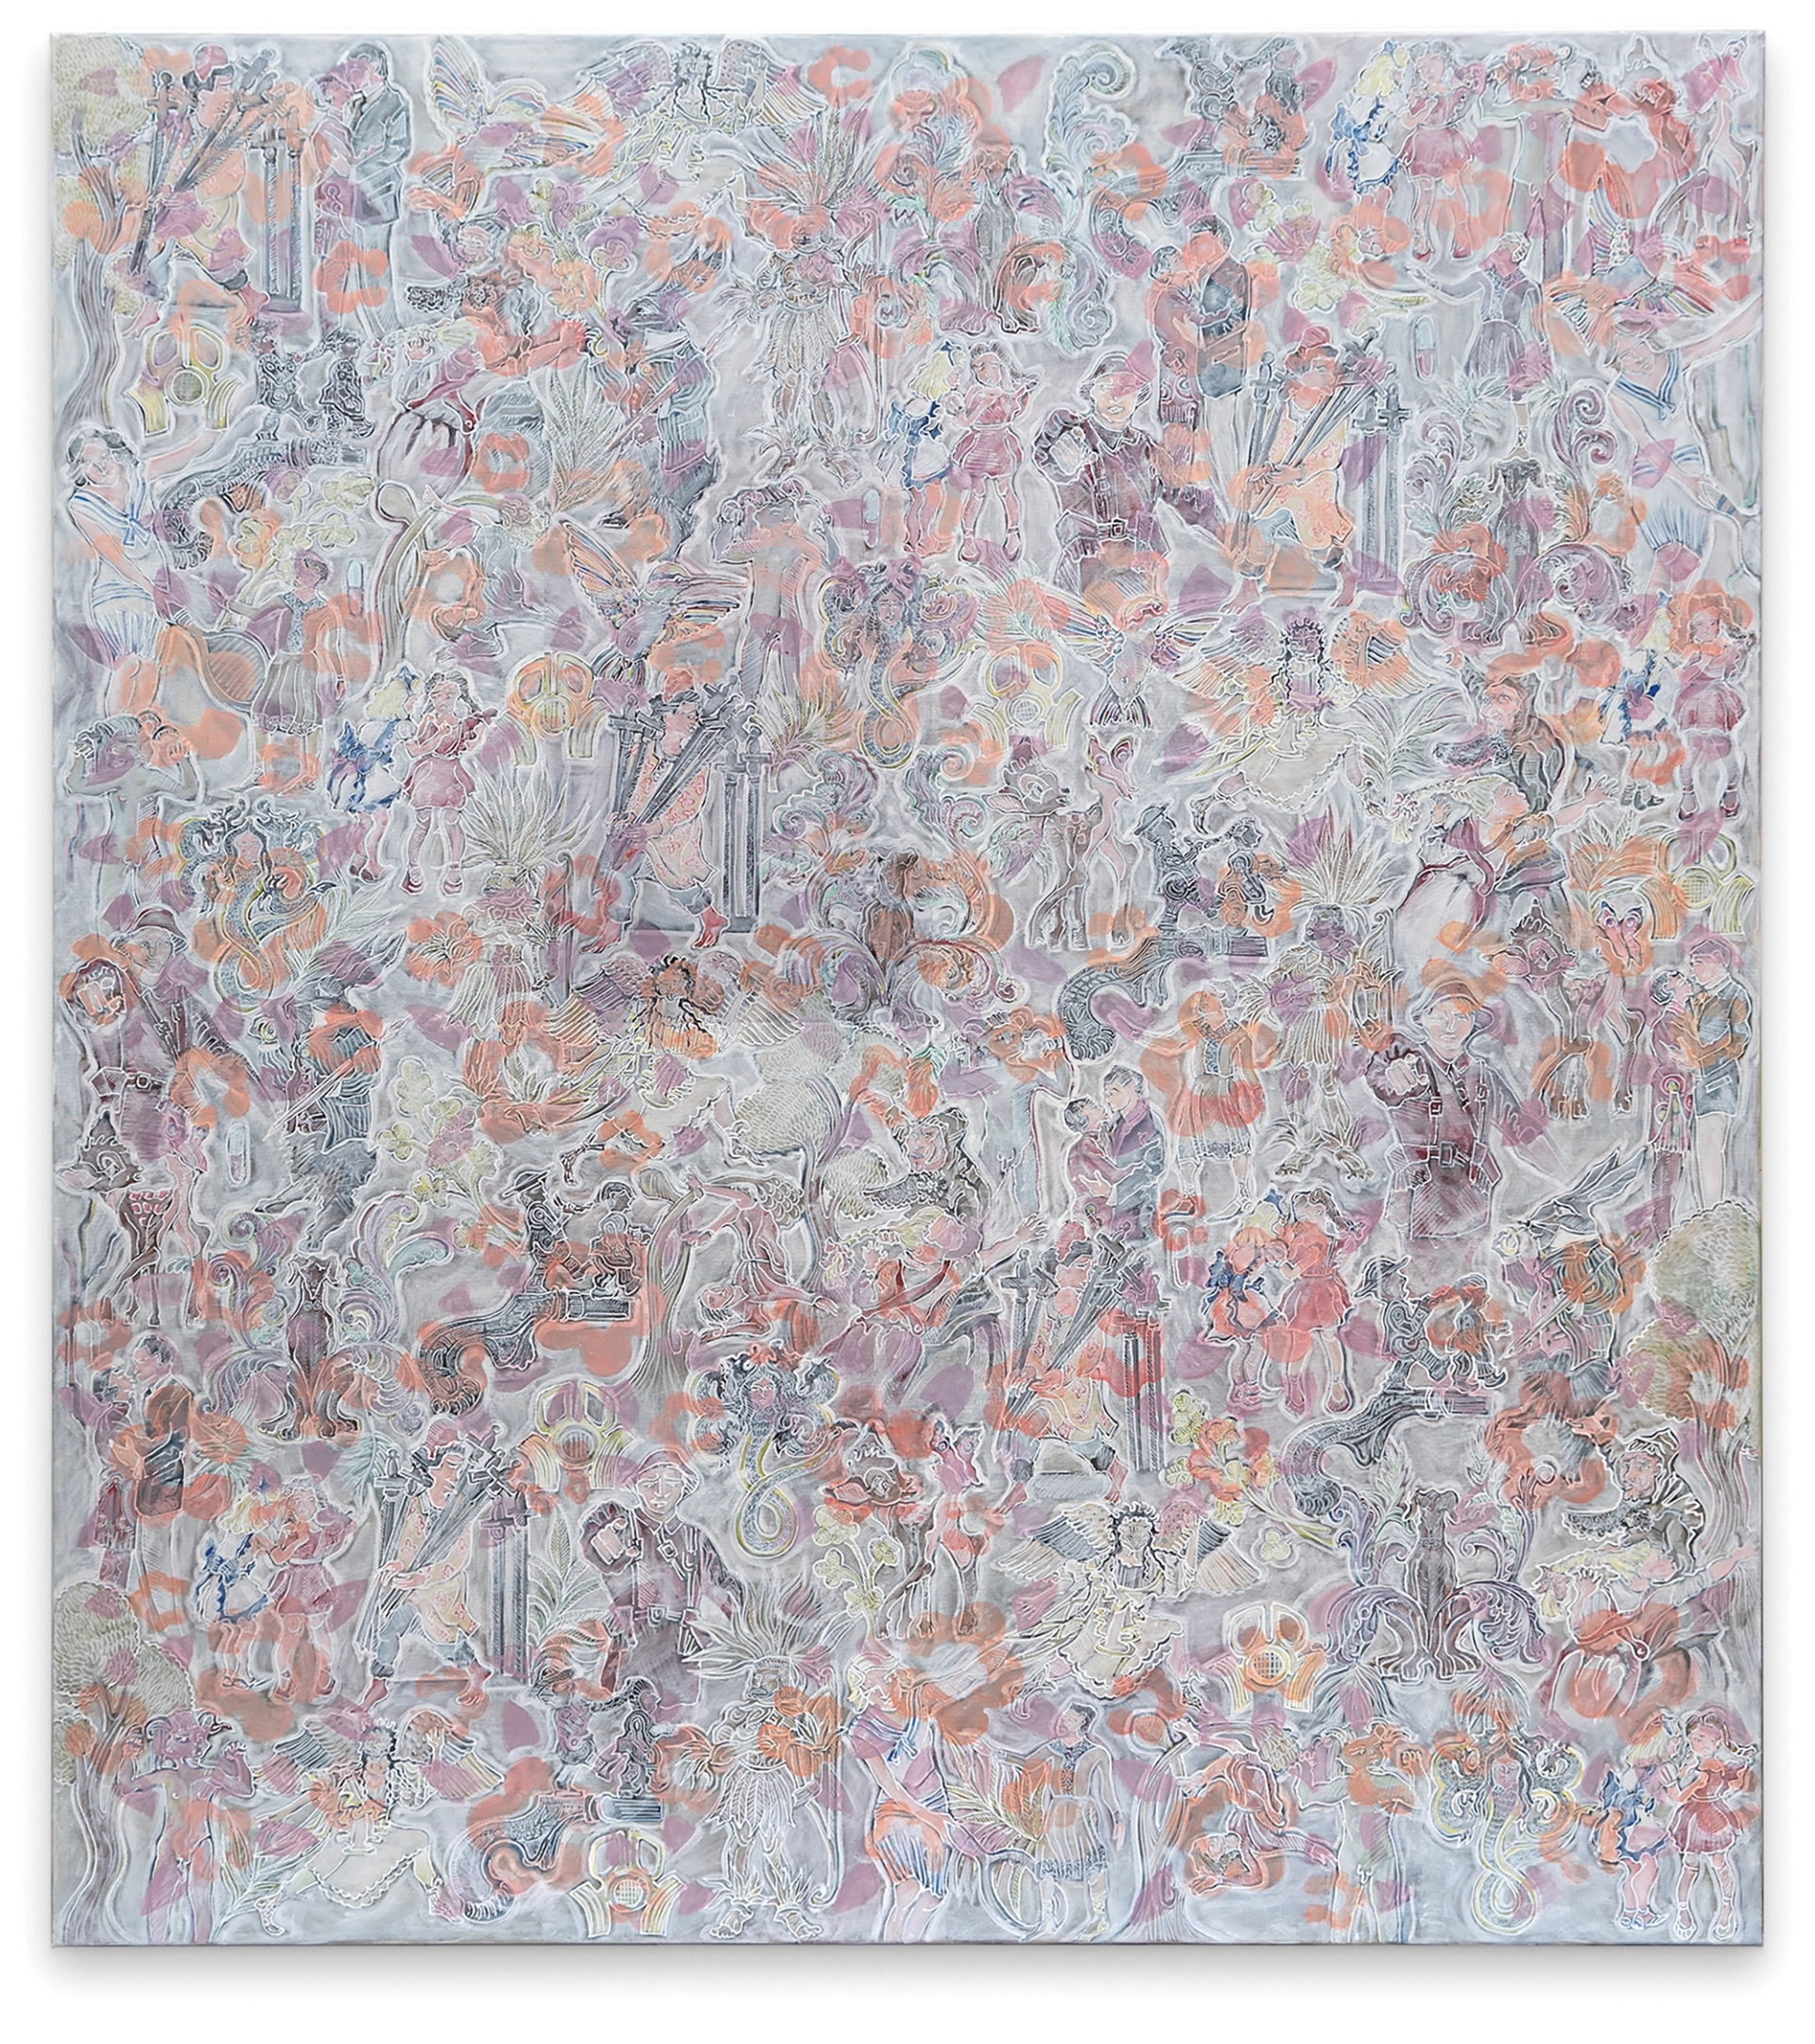 Daniel Moldoveanu, Untitled Wallpaper (peach and lilac), 2022. Courtesy of the artist. 